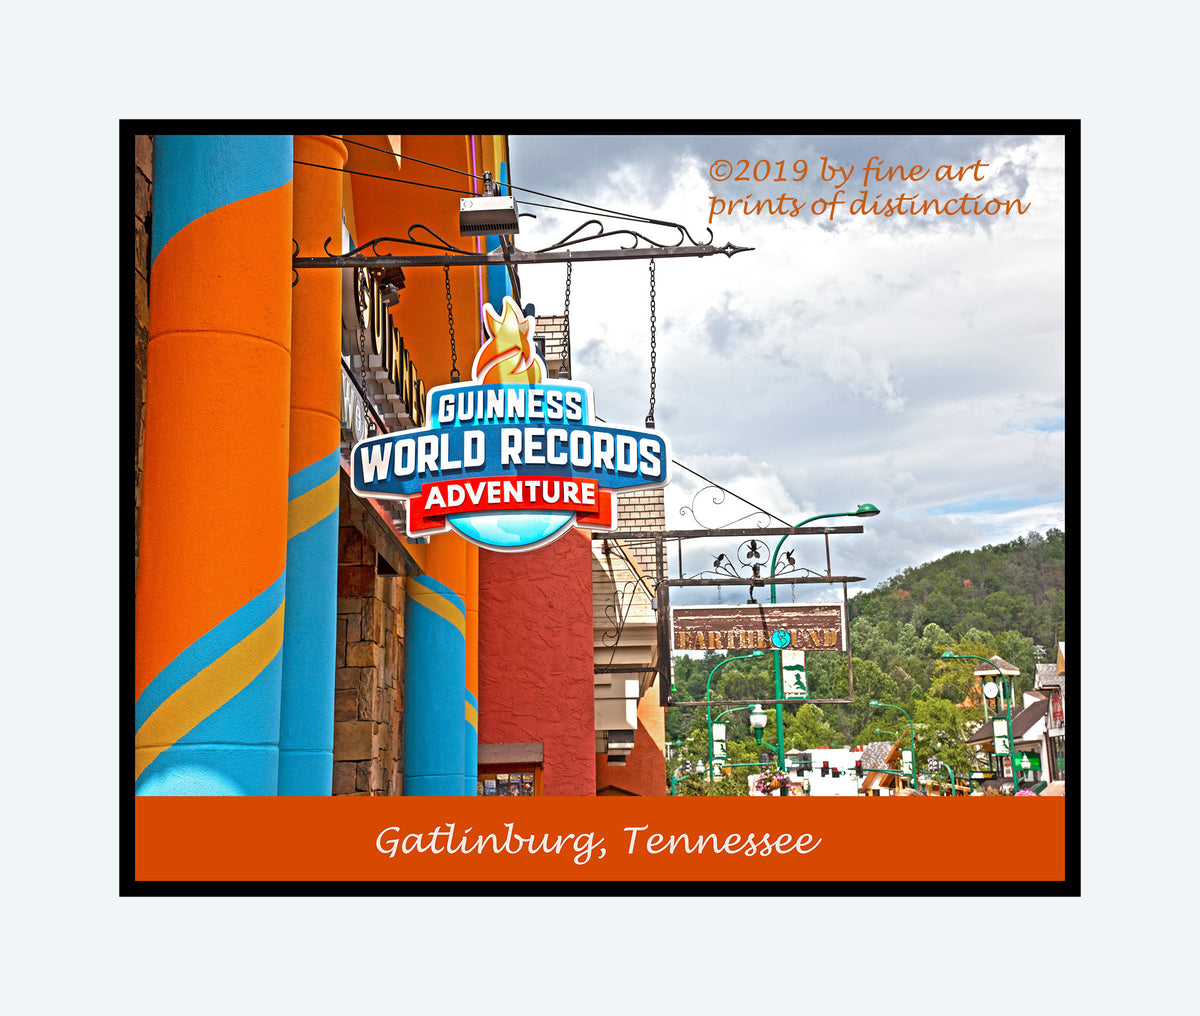 An archival premium Quality art Poster of the Guinness World Record Street Sign at Gatlinburg, Tennessee for sale by Brandywine General Store